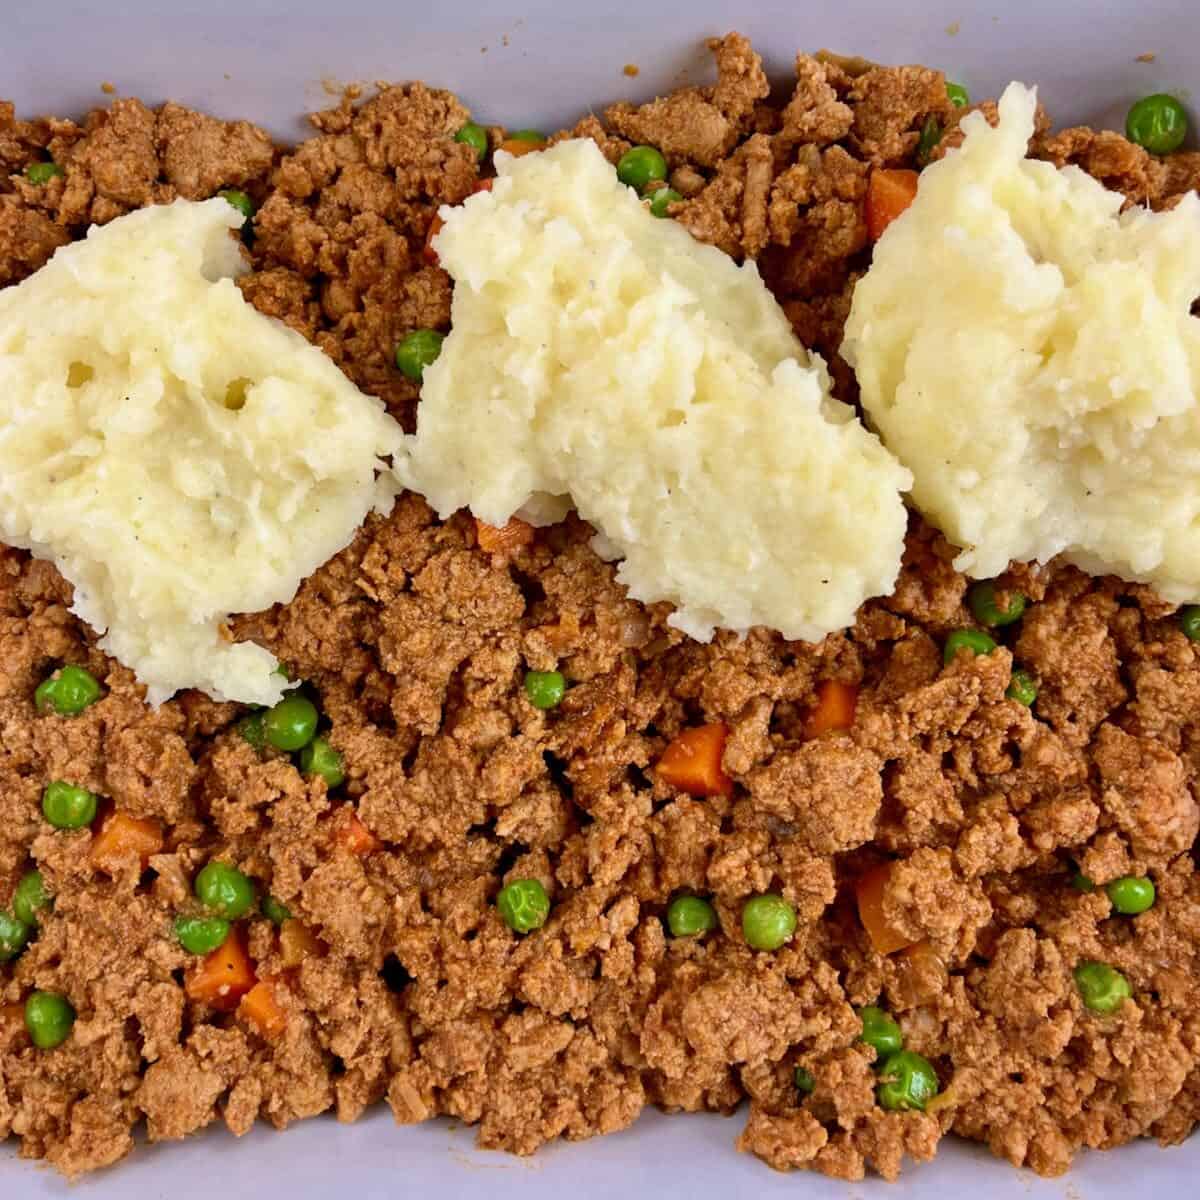 Adding the mashed potato layer dolloped on top of the ground turkey filling for Curried Ground Turkey Shepherd’s Pie